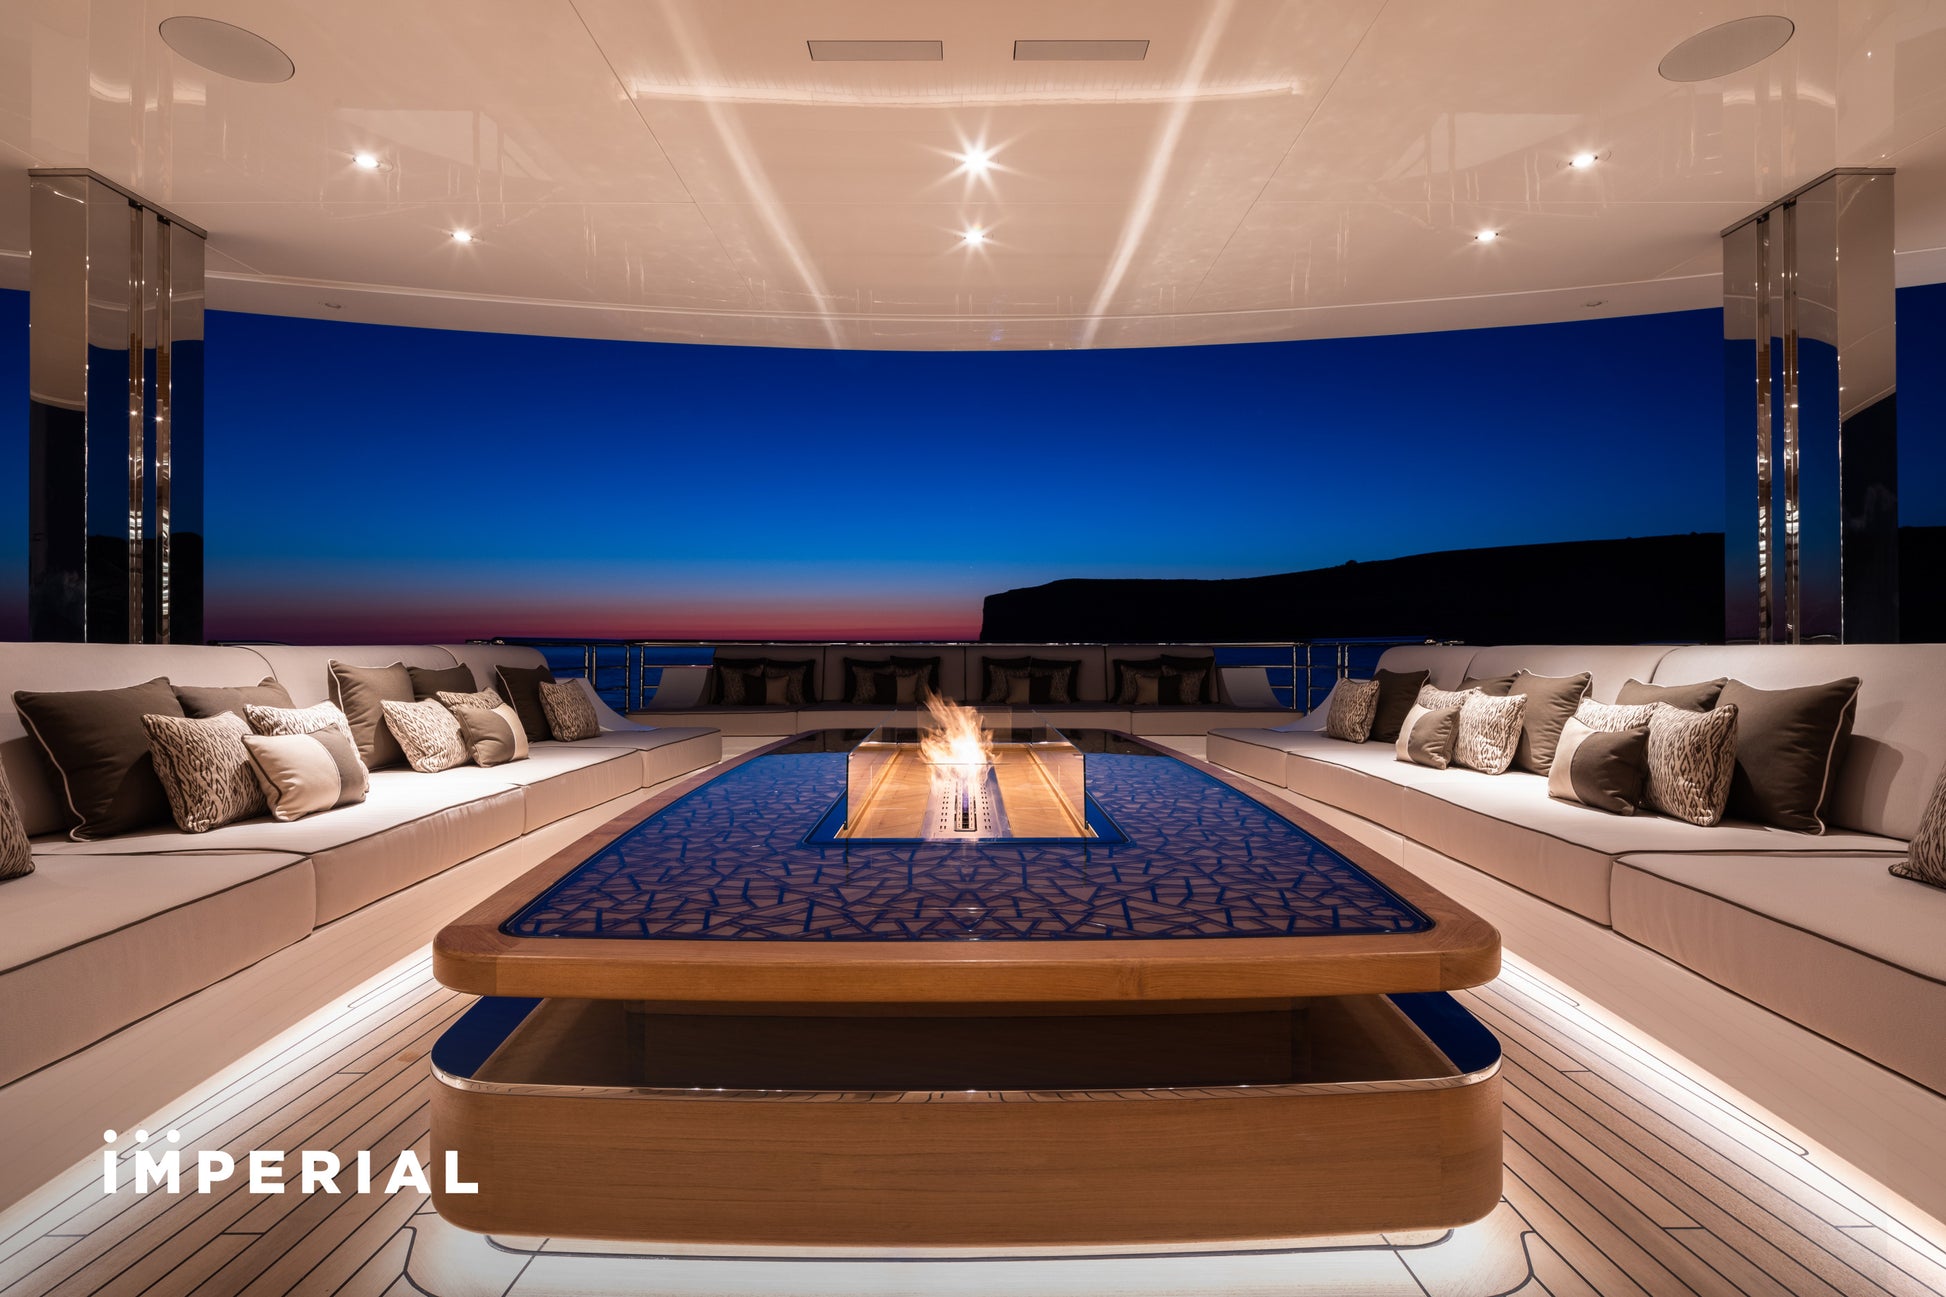 Crea7ionEVOPlus Automatic Bioethanol Insert in lounge table on yacht